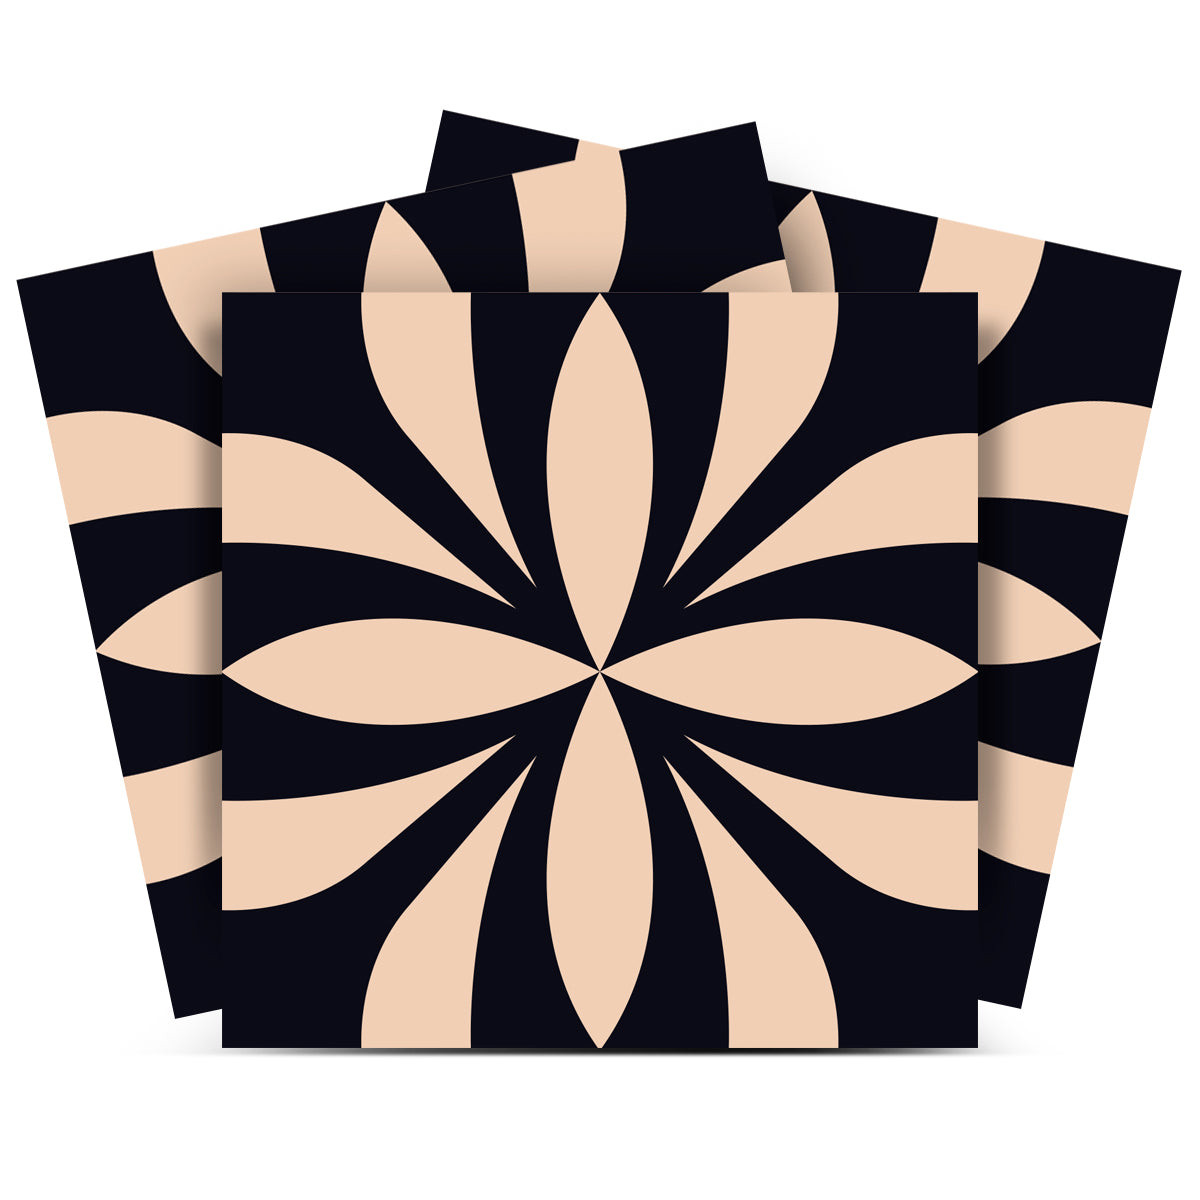 7" X 7" Intertwined Black And Cream Peel And Stick Removable Tiles-390771-1